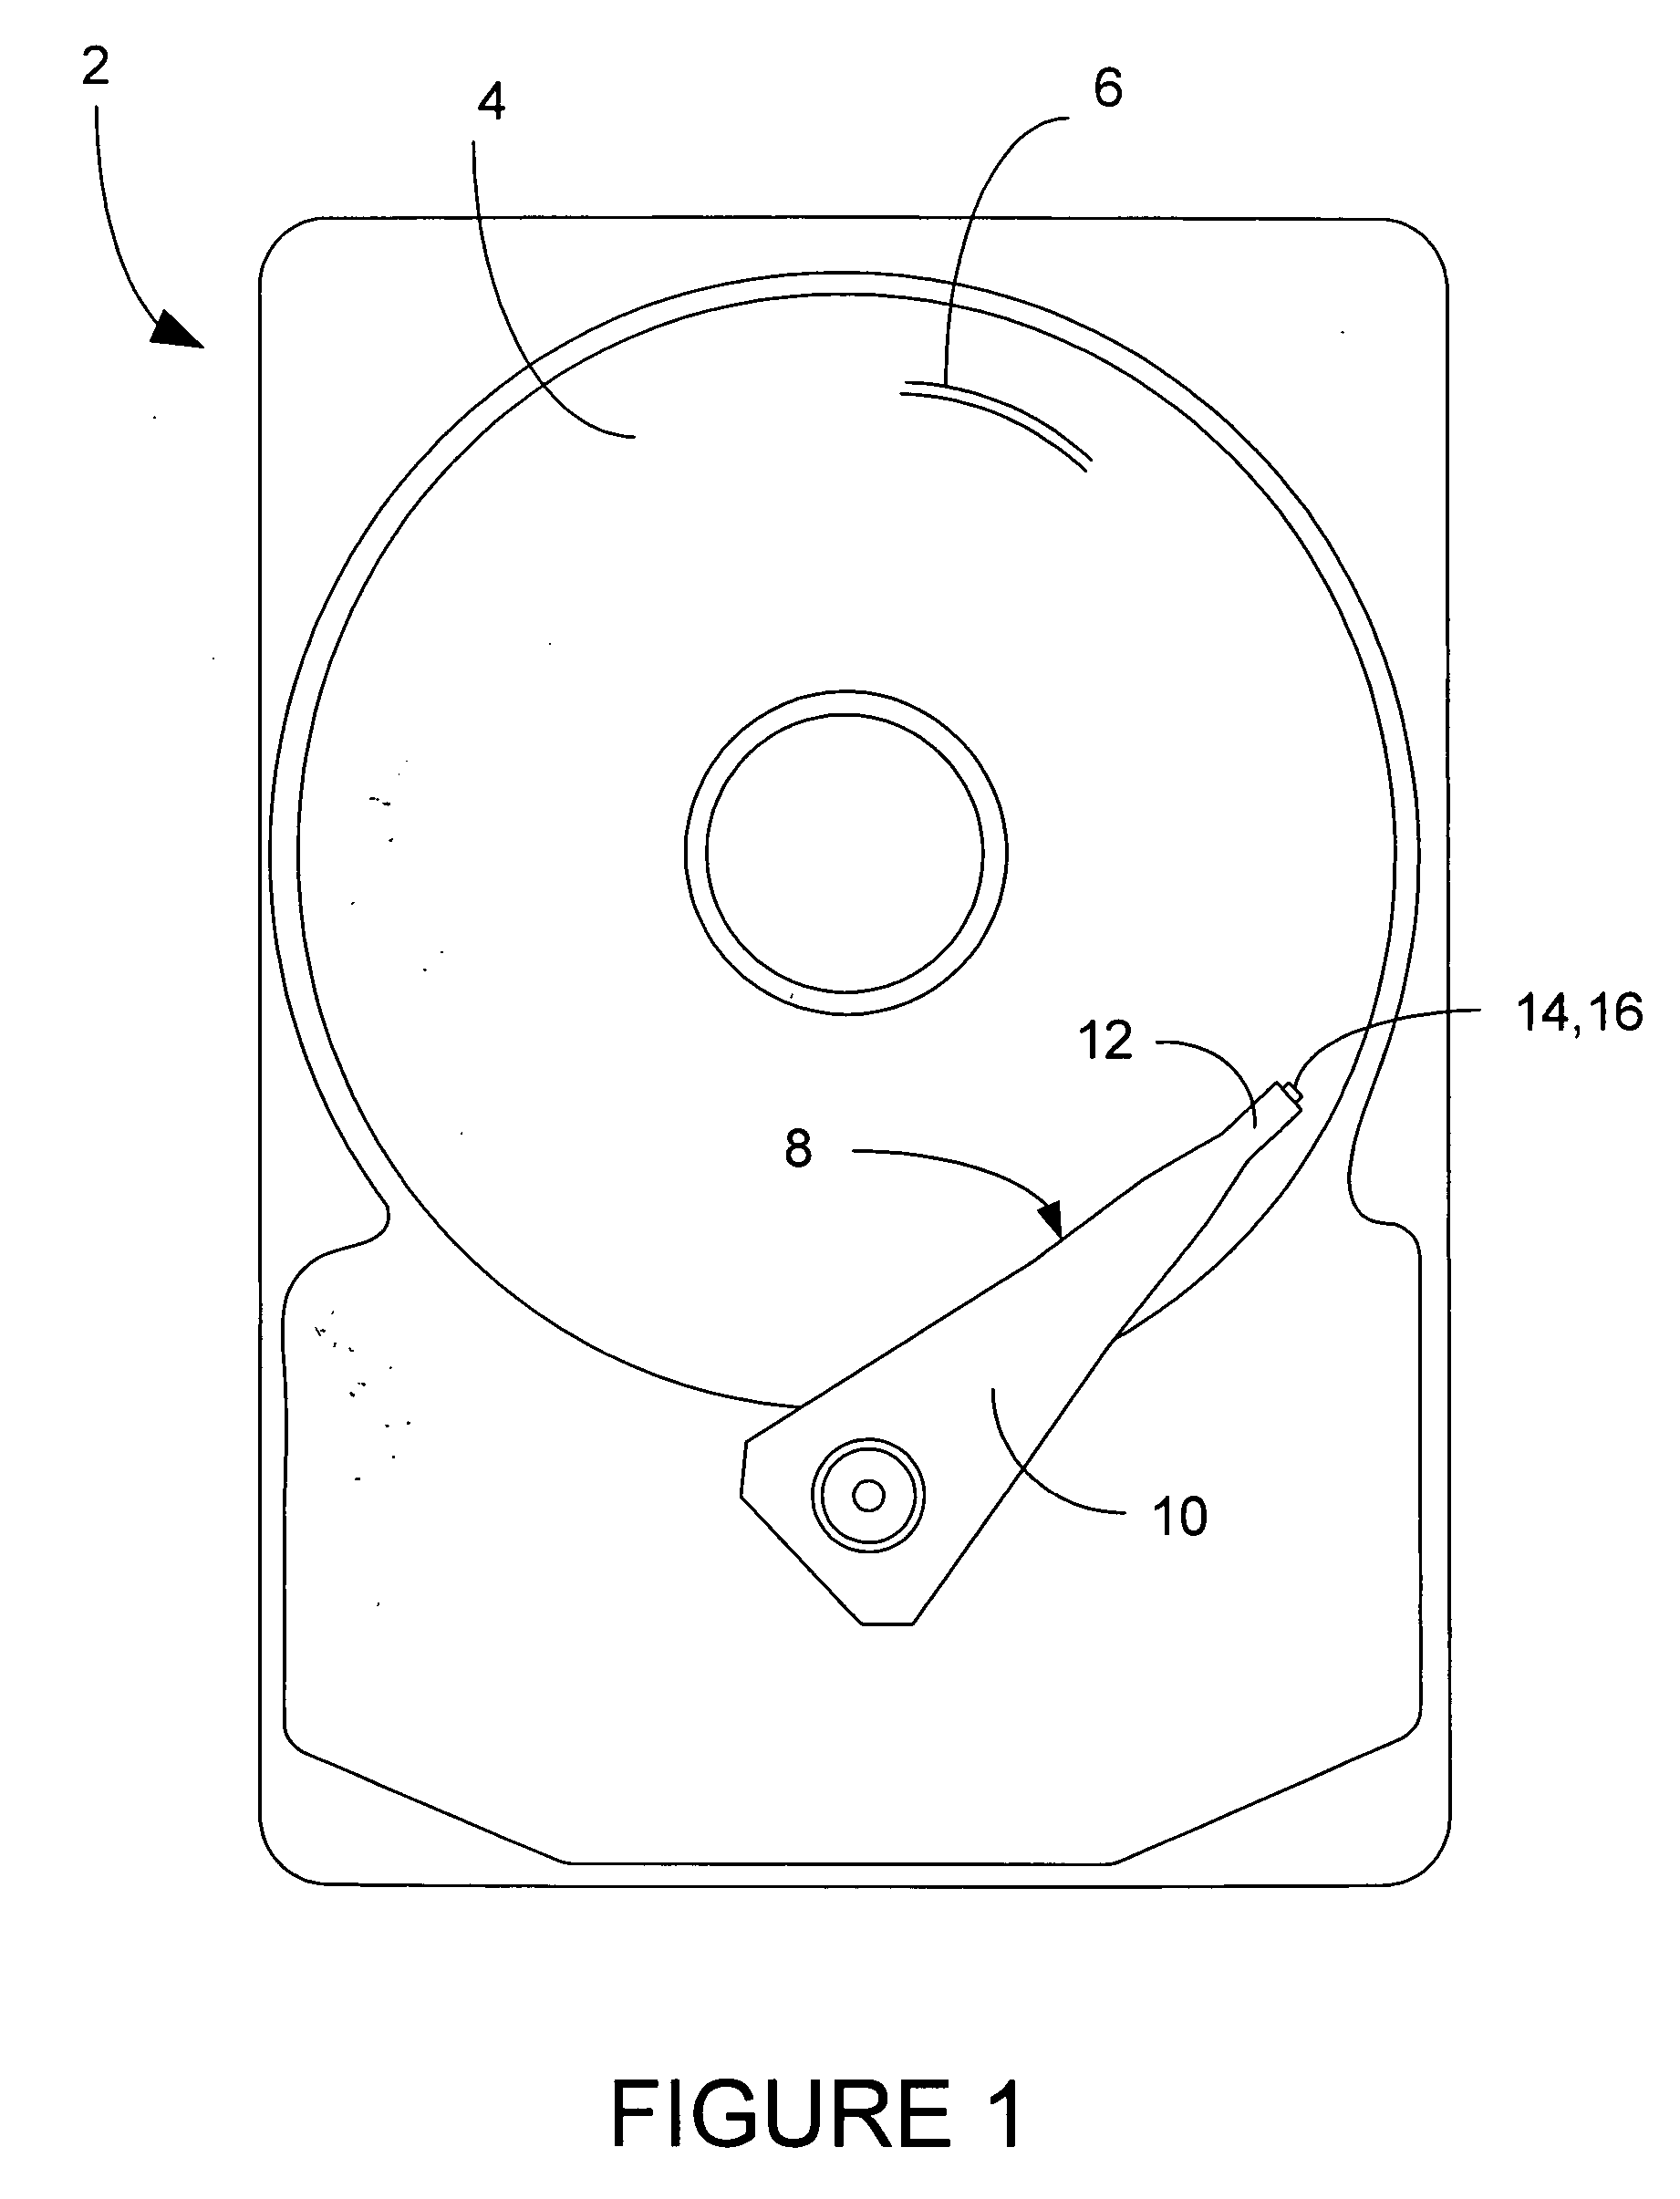 Method of fabrication for read head having shaped read sensor-biasing layer junctions using partial milling